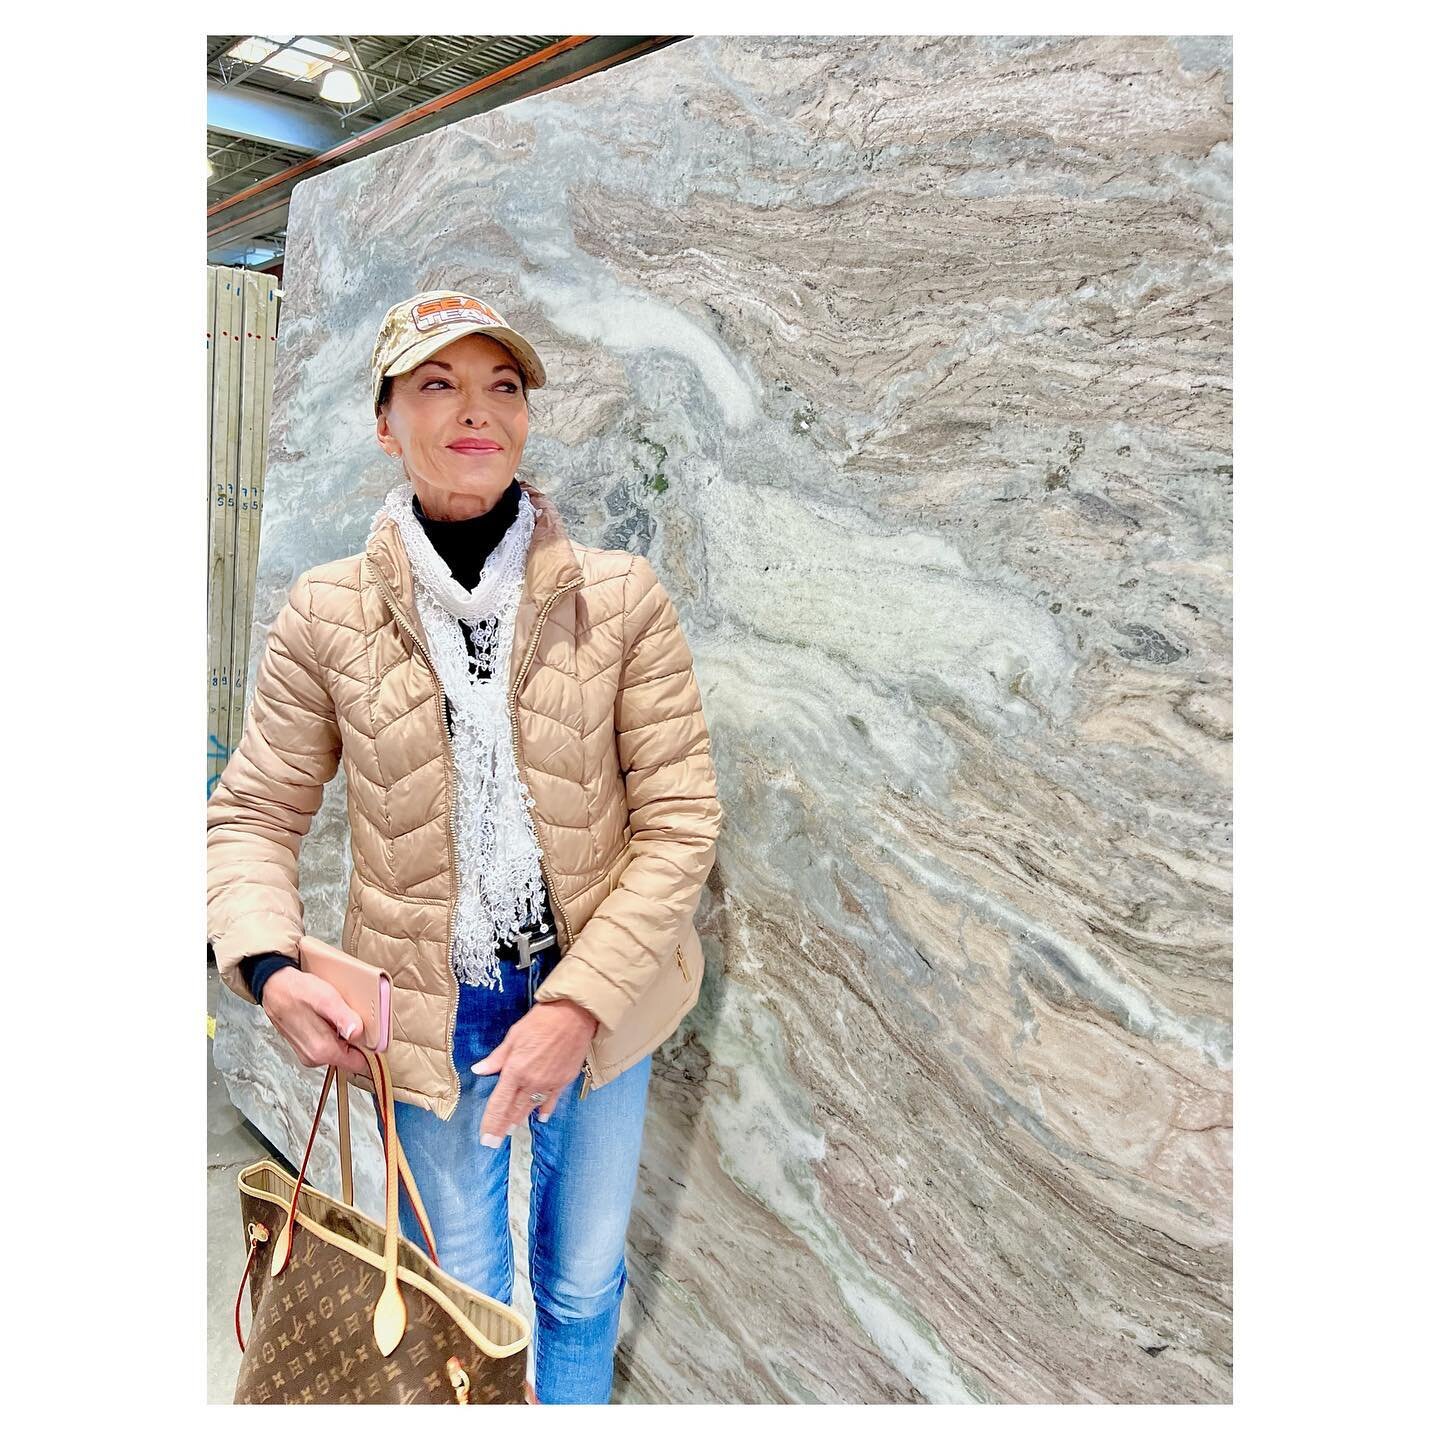 Love at first sight! 😍😎

Walking the aisles of the stone yard never gets old.  The natural beauty is aw-inspiring and yesterday during our stone selection it felt even more emotional. Watching my client&rsquo;s reaction of pure joy coupled with the